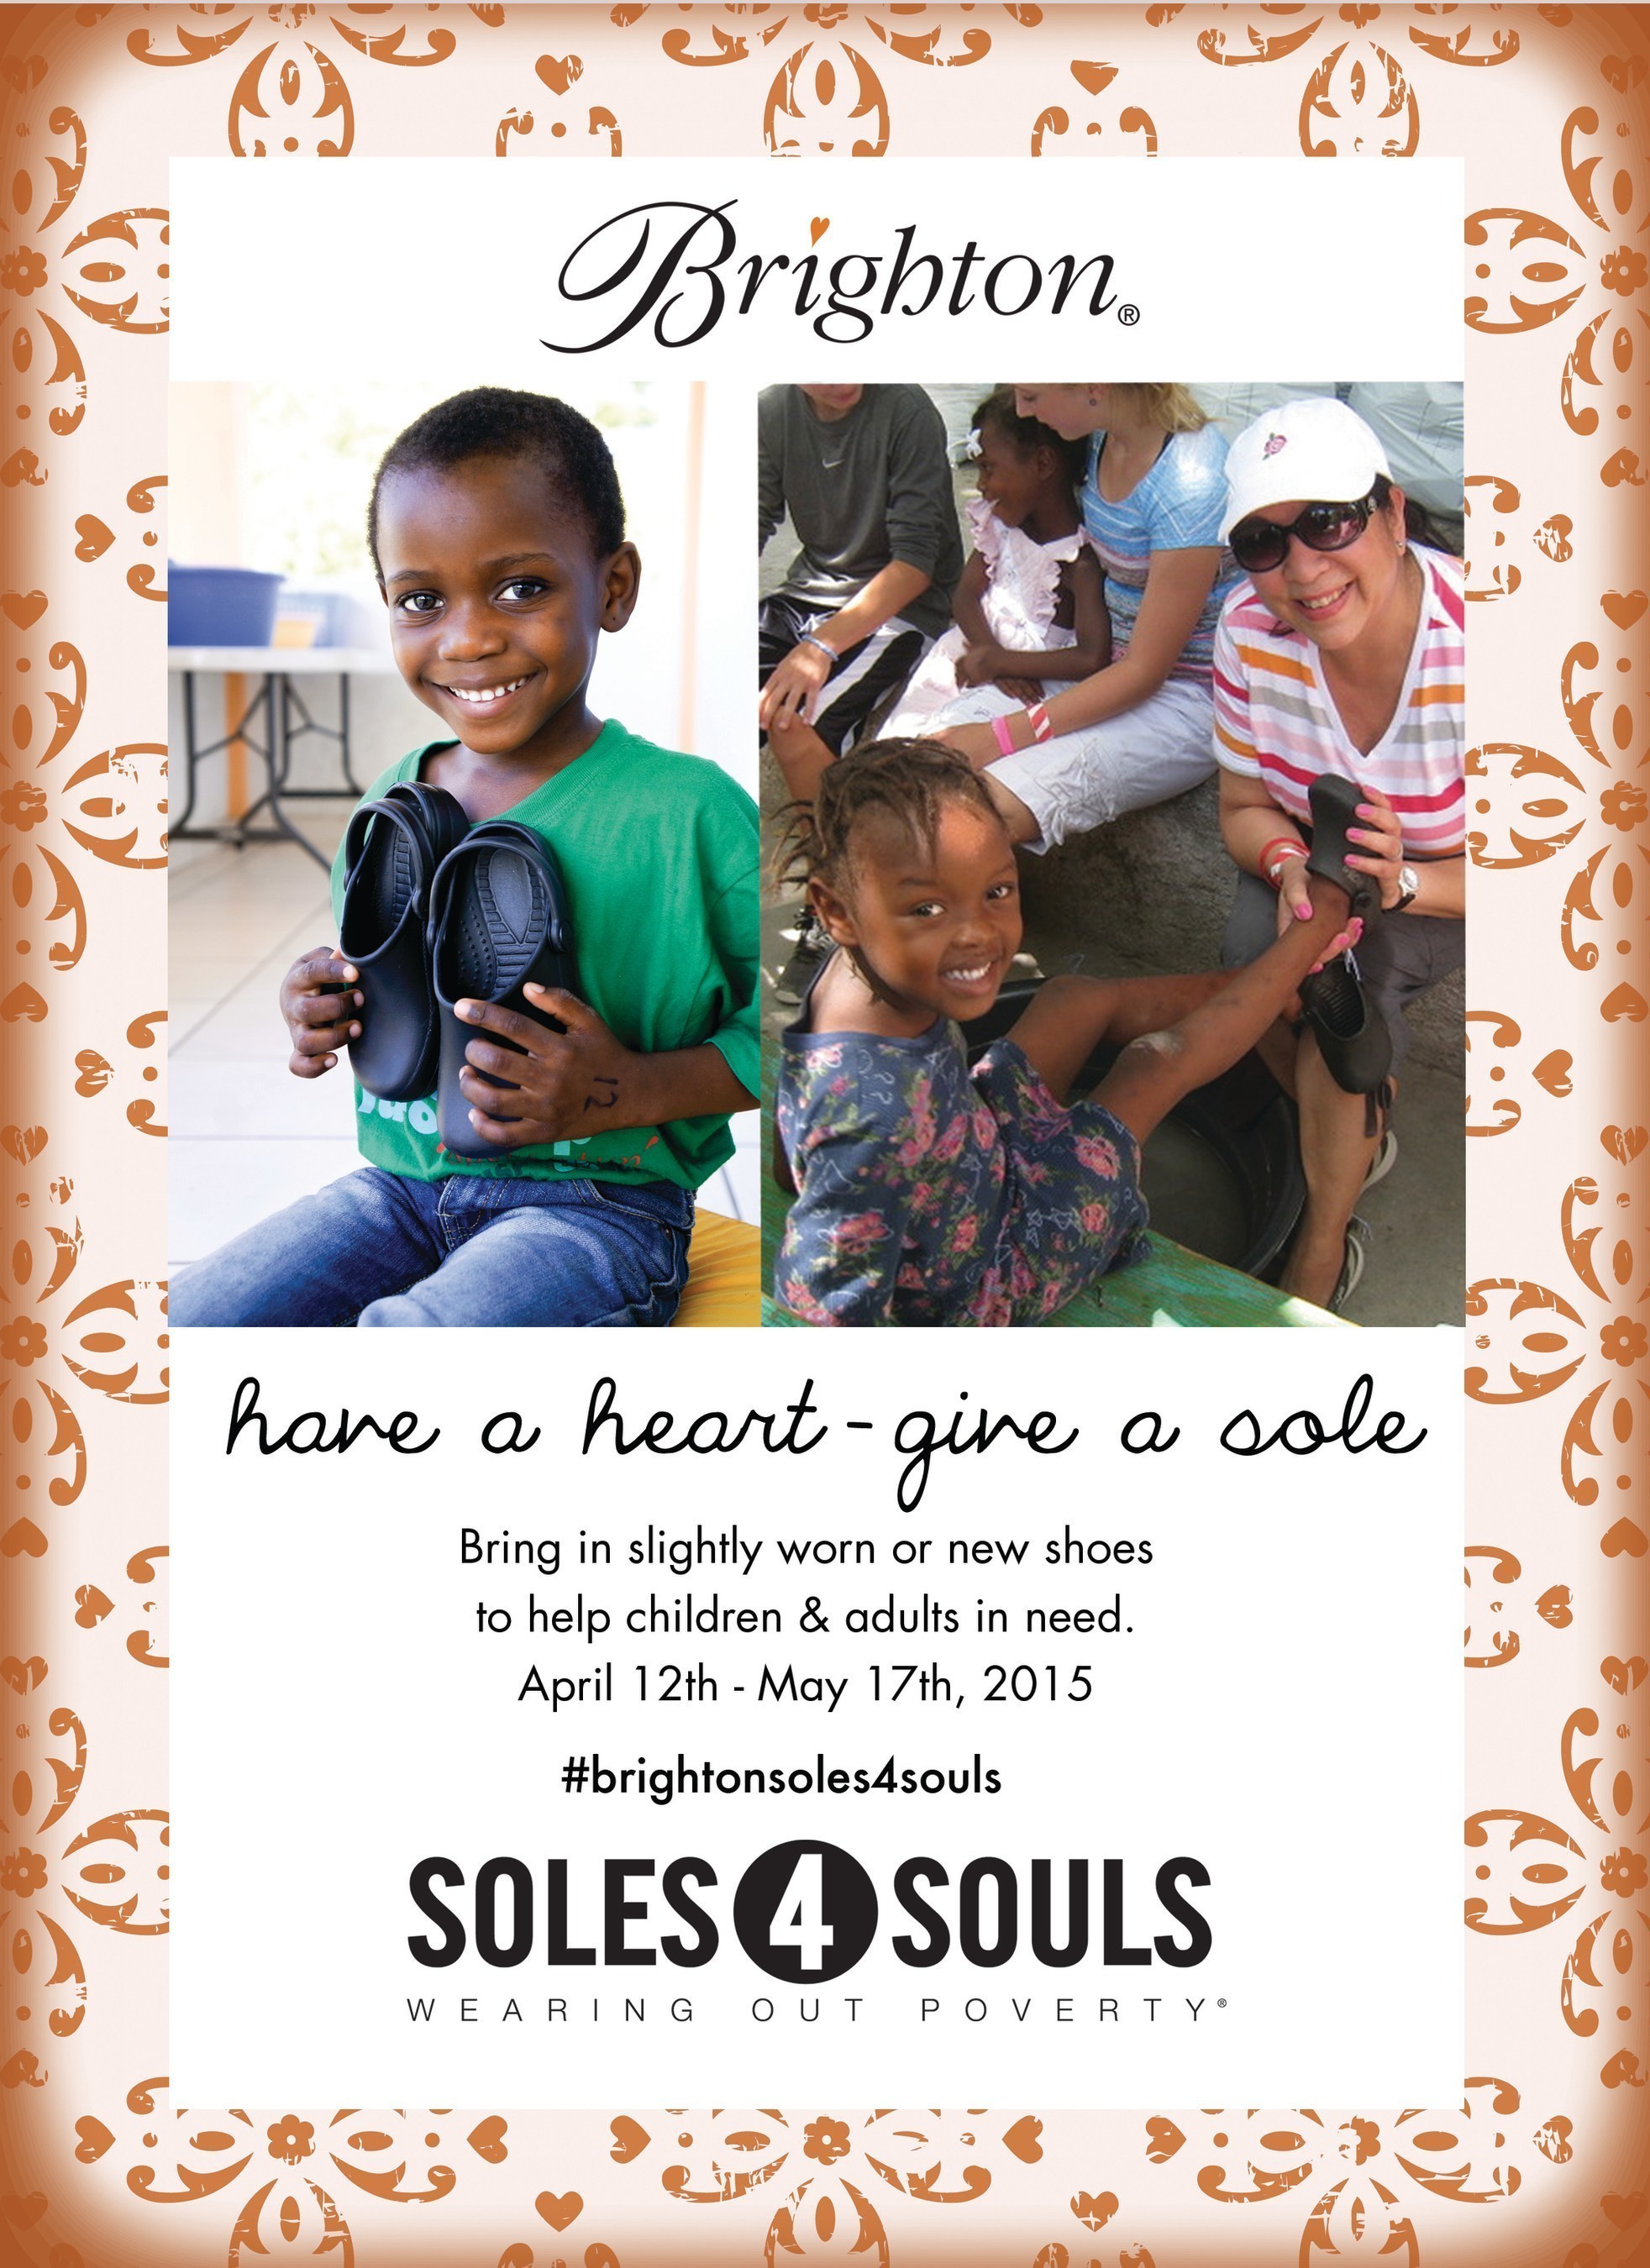 Help Brighton Collectibles Collect 100,000 pairs of shoes to fight global poverty